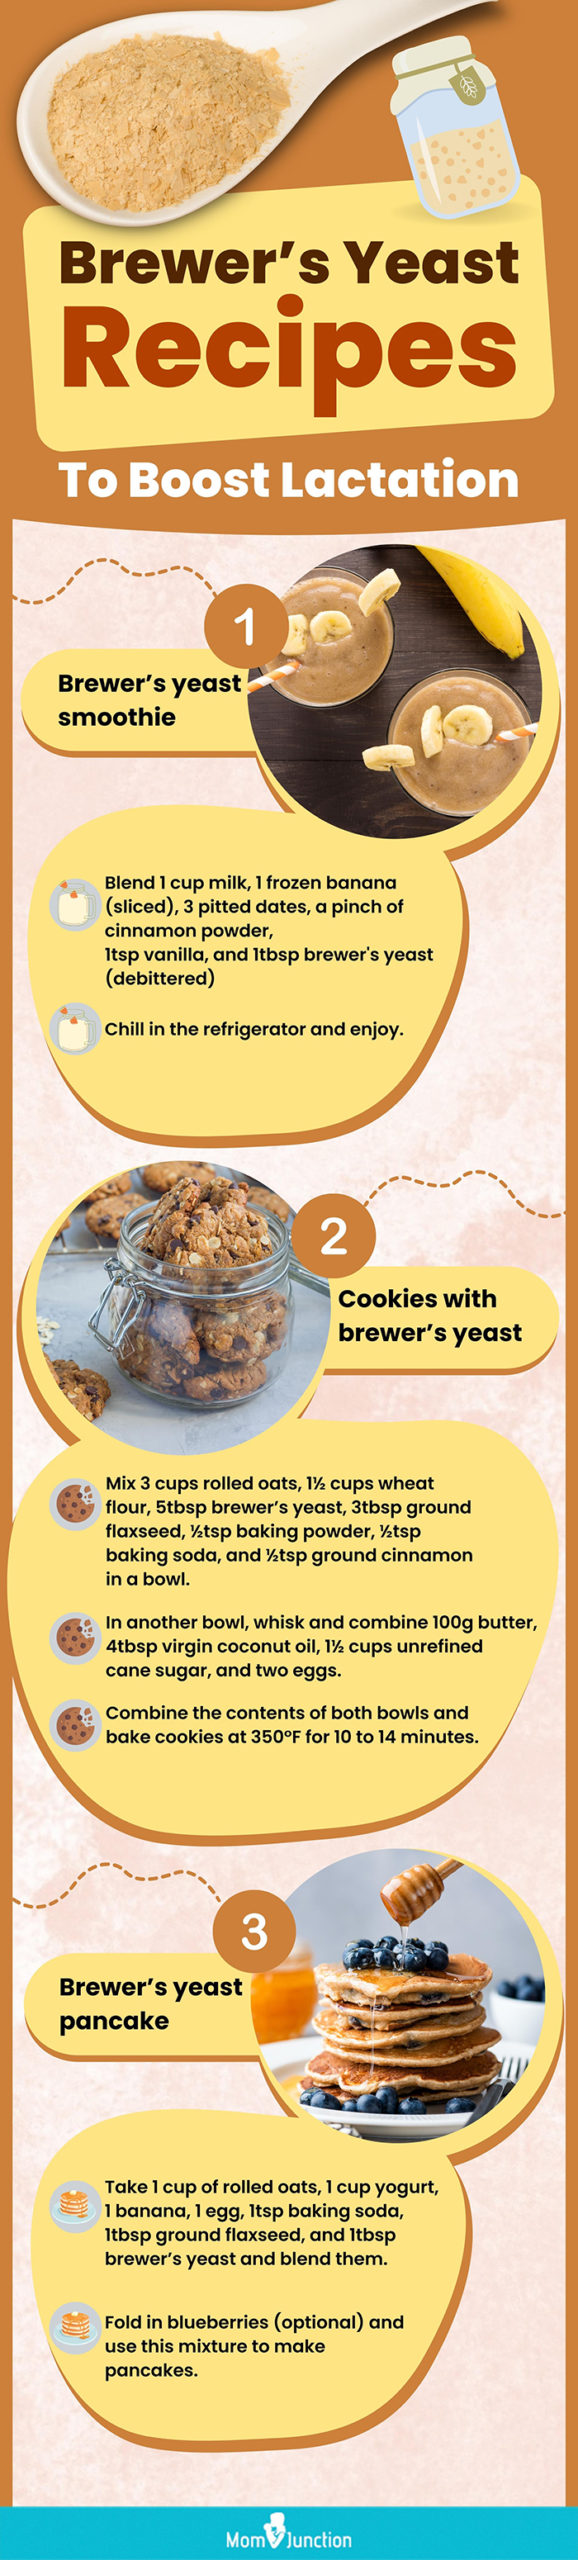 brewers yeast recipes to boost lactation (infographic)